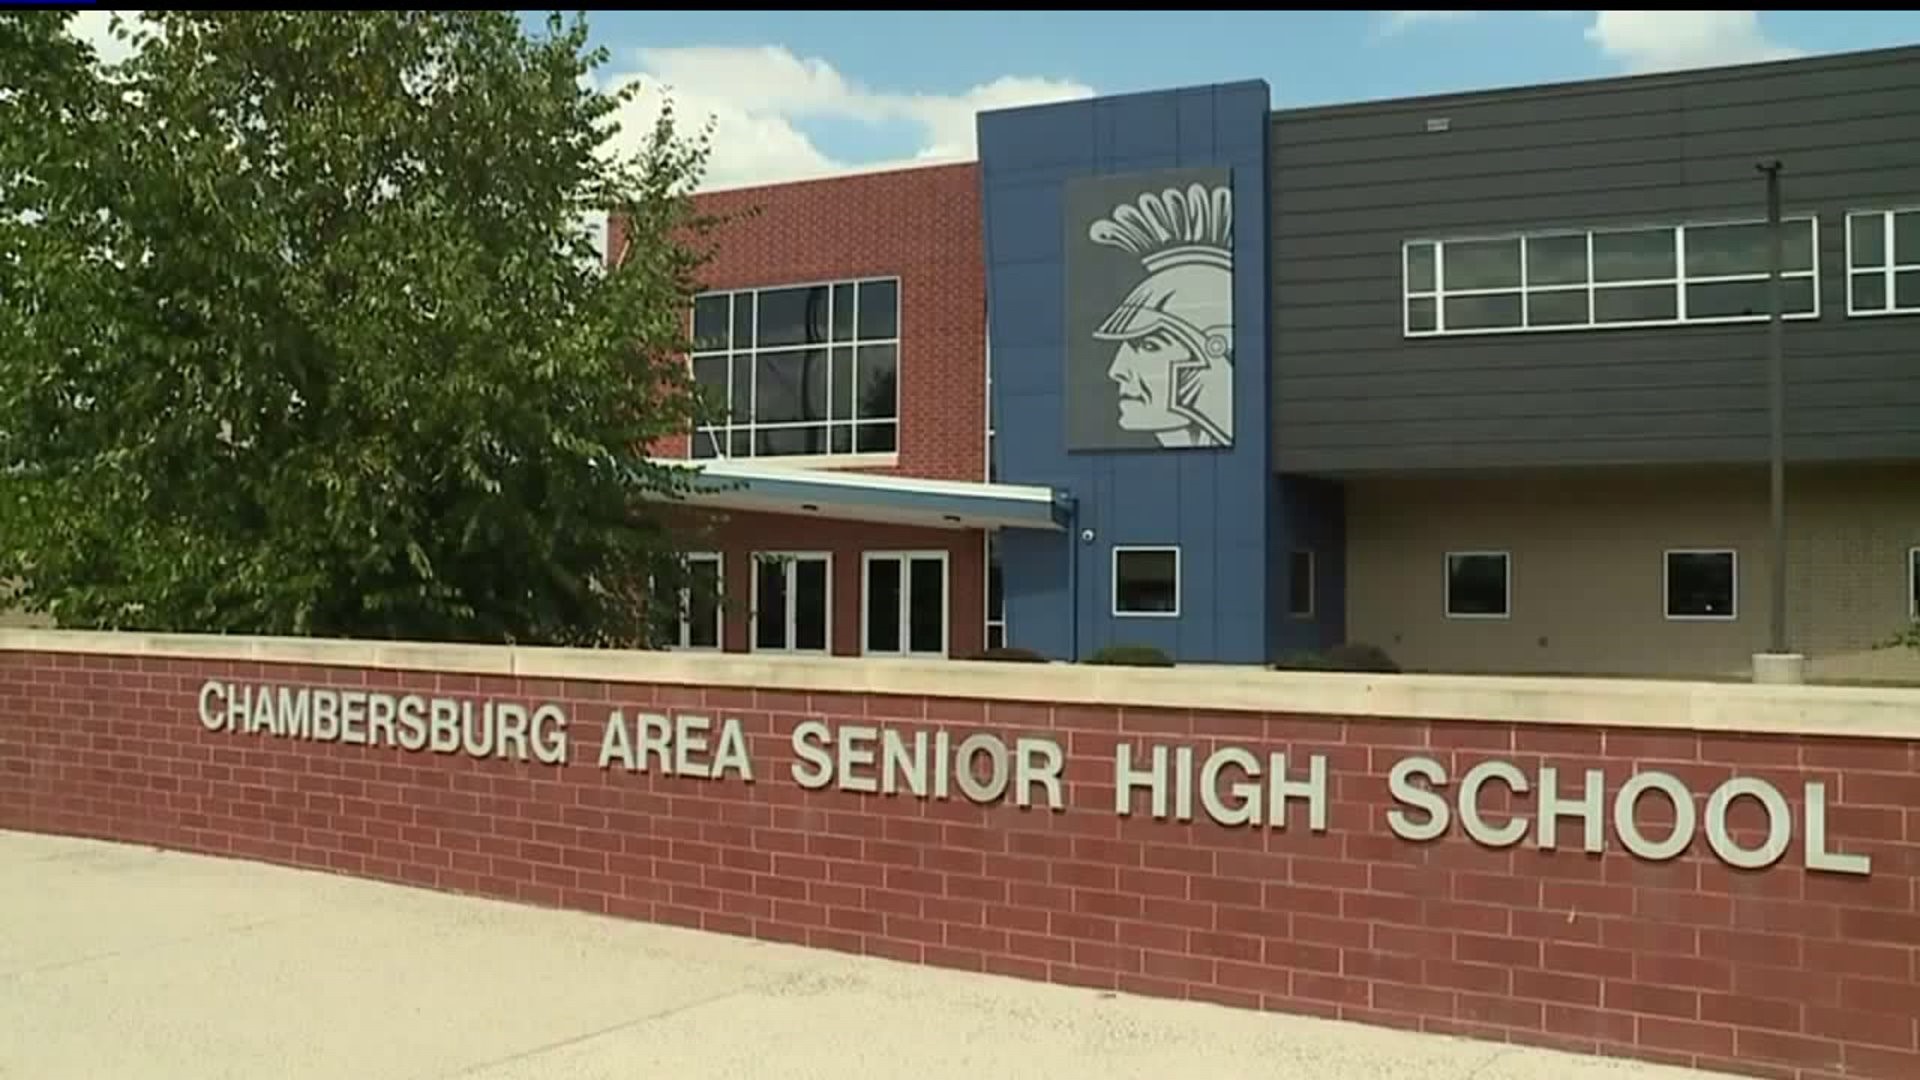 New security measures for sporting events are taking effect at Chambersburg Area High School in Franklin County